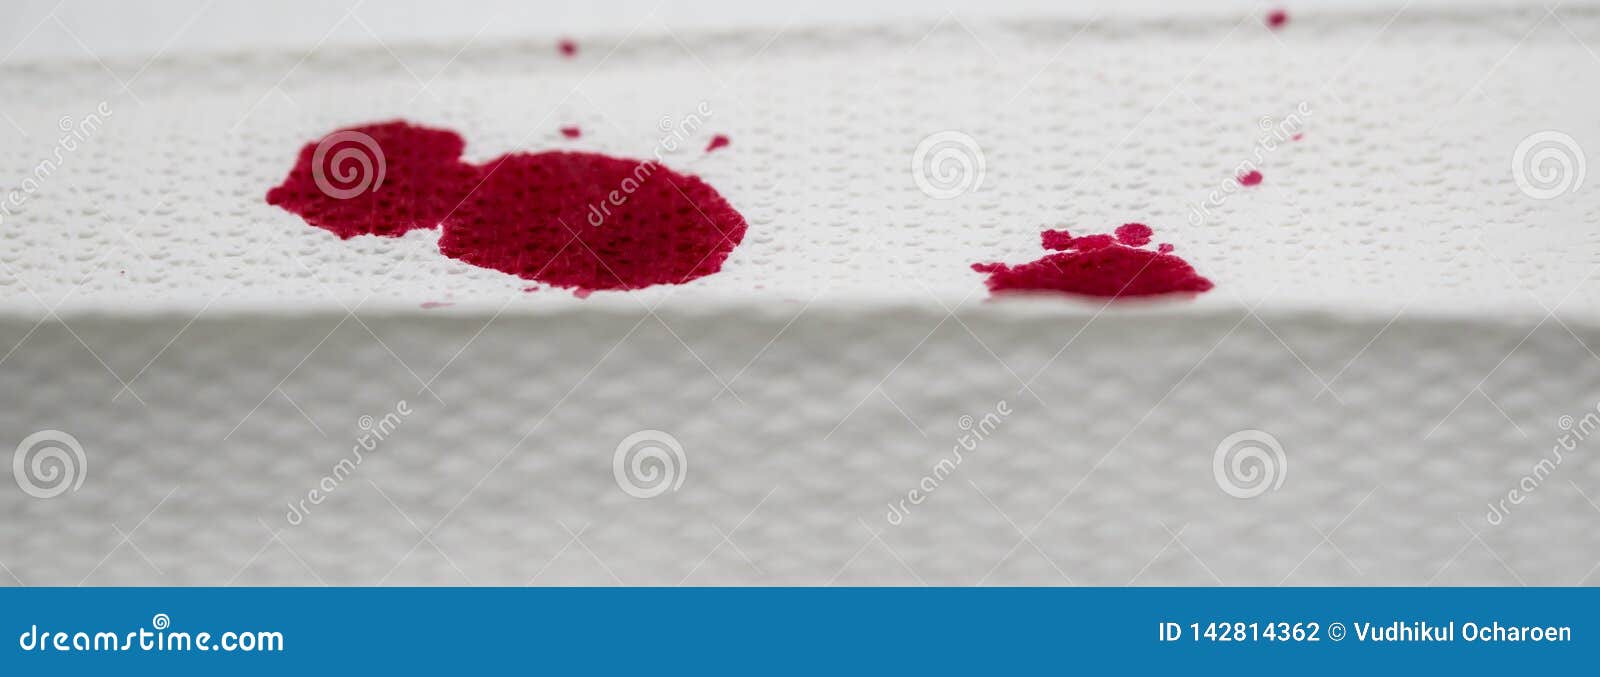 red color drops on textured towel paper, like nosebleed. closed up image for crime scene